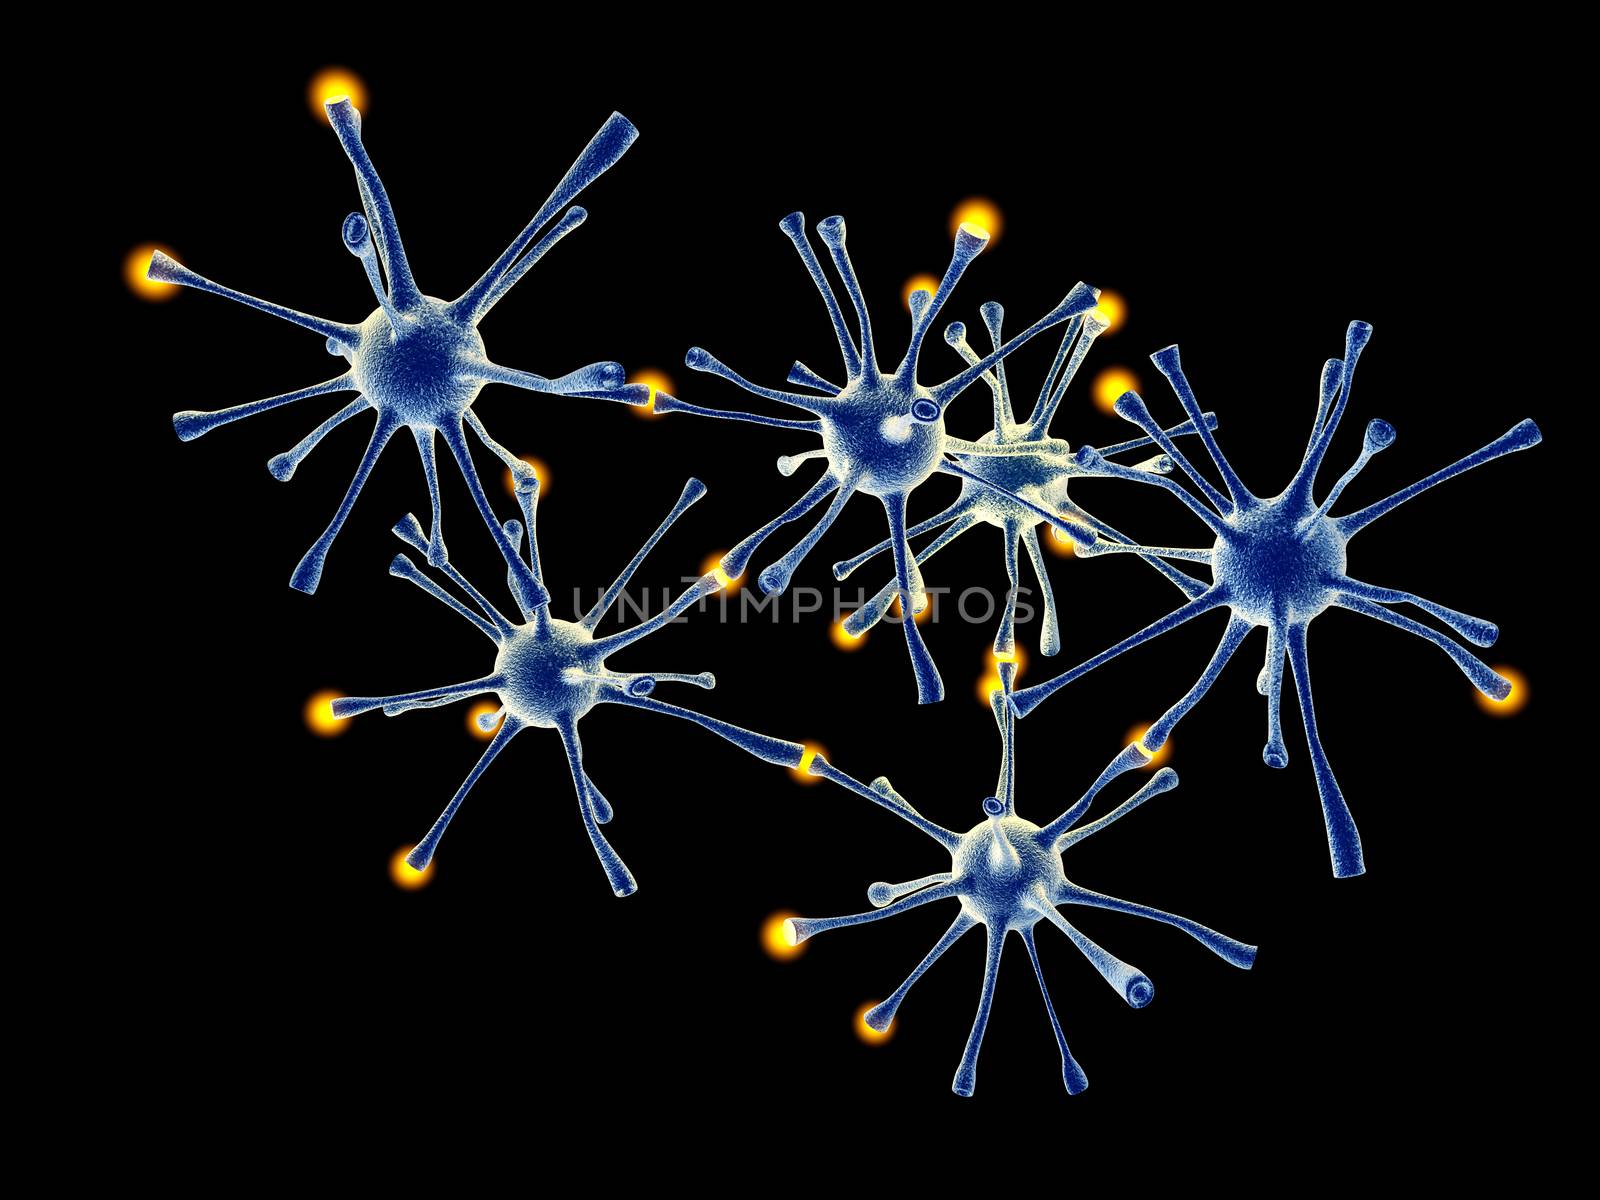 3D rendered Illustration. Interacting neuronal cells.